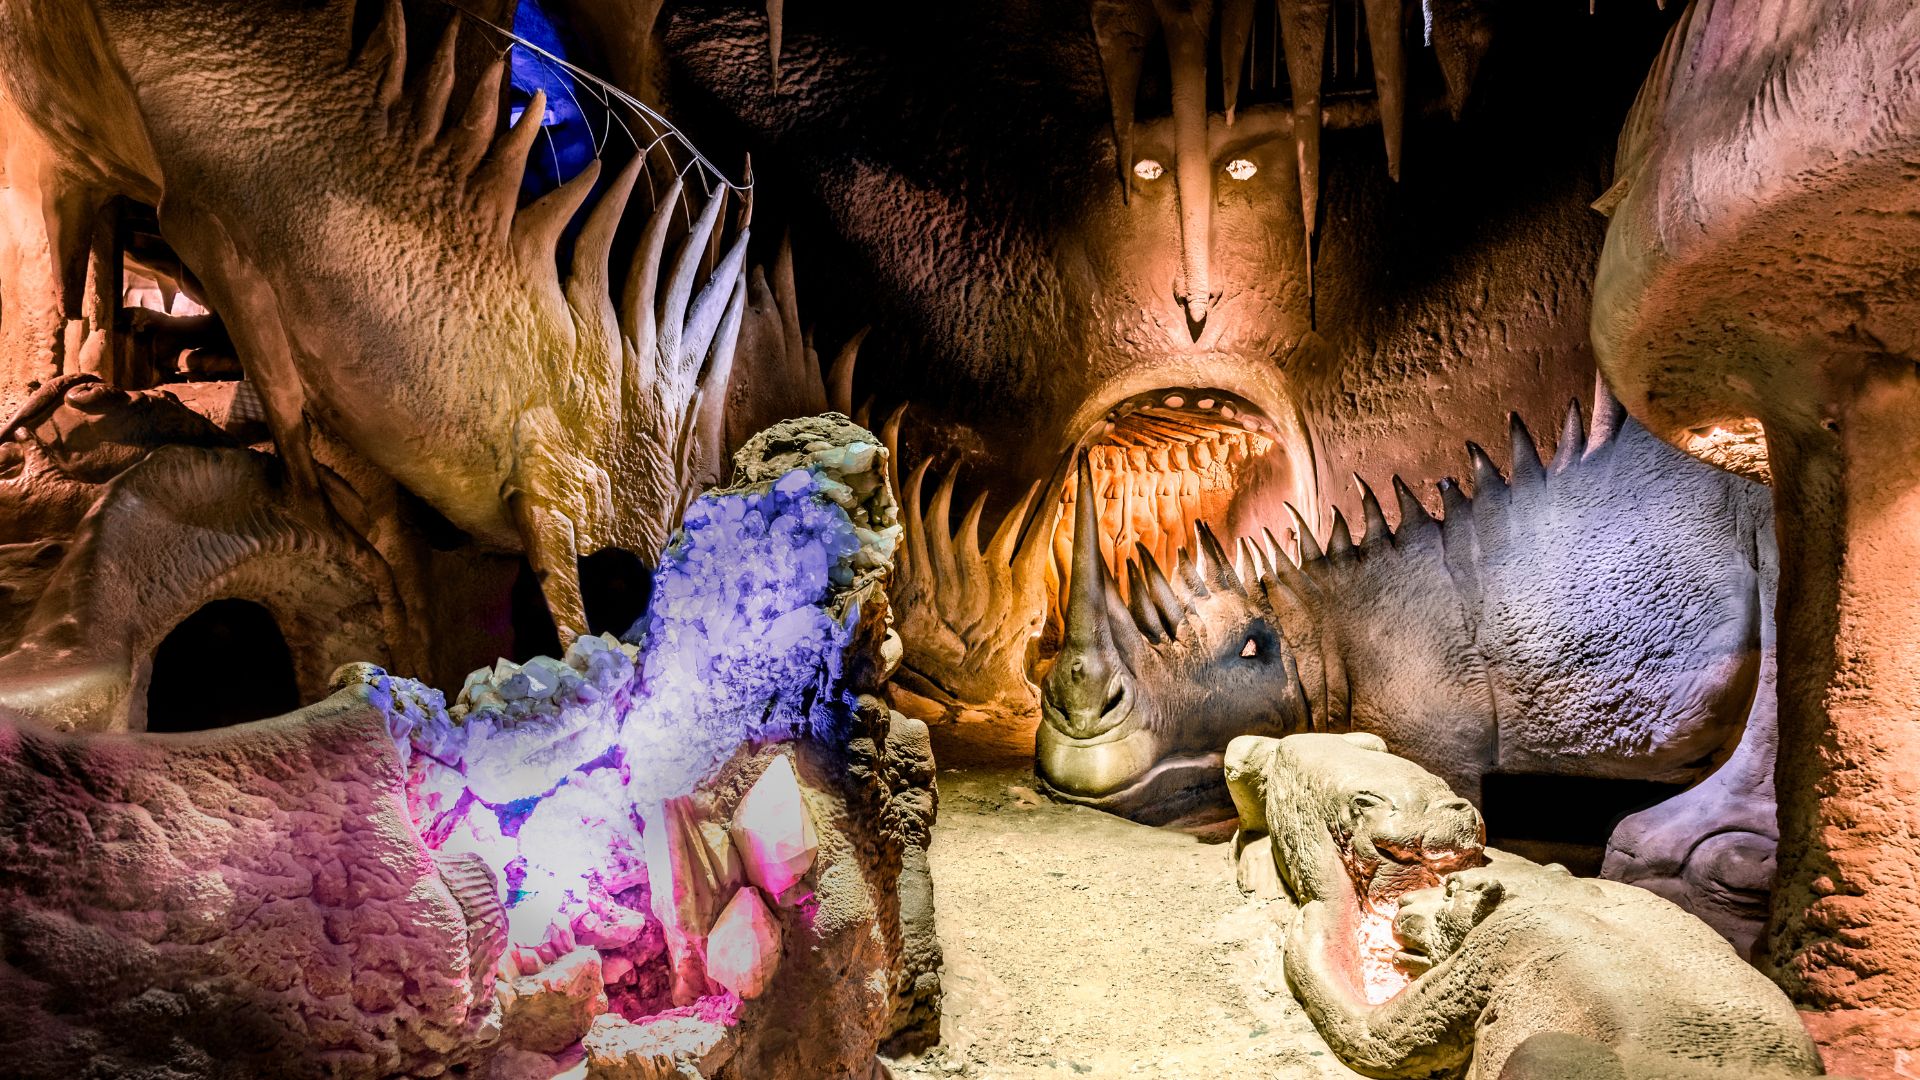 City Museum features enchanted caves that delight guests of all ages.